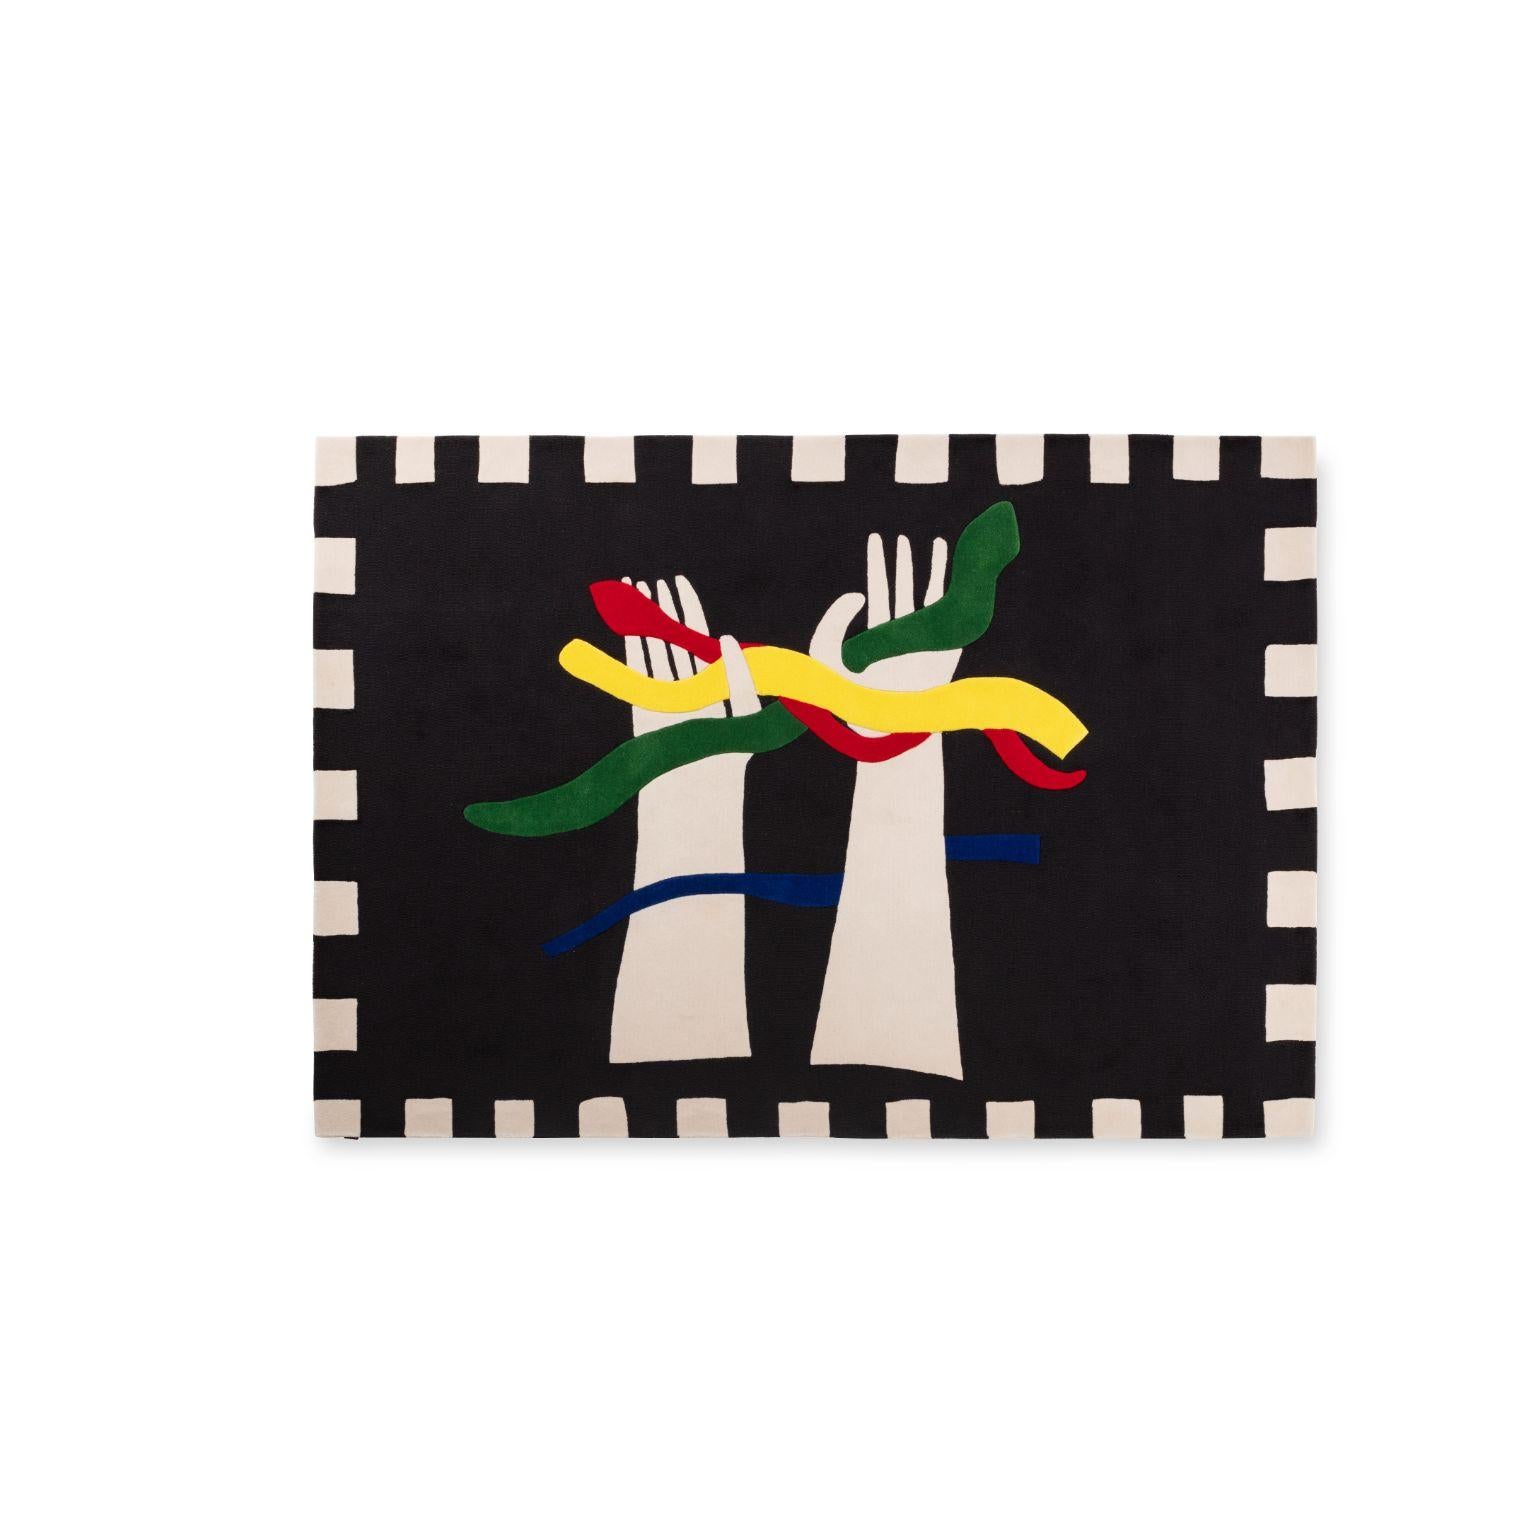 Color Wave rug by Jean-Charles de Castelbajac
Dimensions: W 170 x H 240 cm
Materials: Wool
Dimension customization is possible for bigger format only. 

Jean-Charles de Castelbajac is a visionary designer and artist who anticipated the